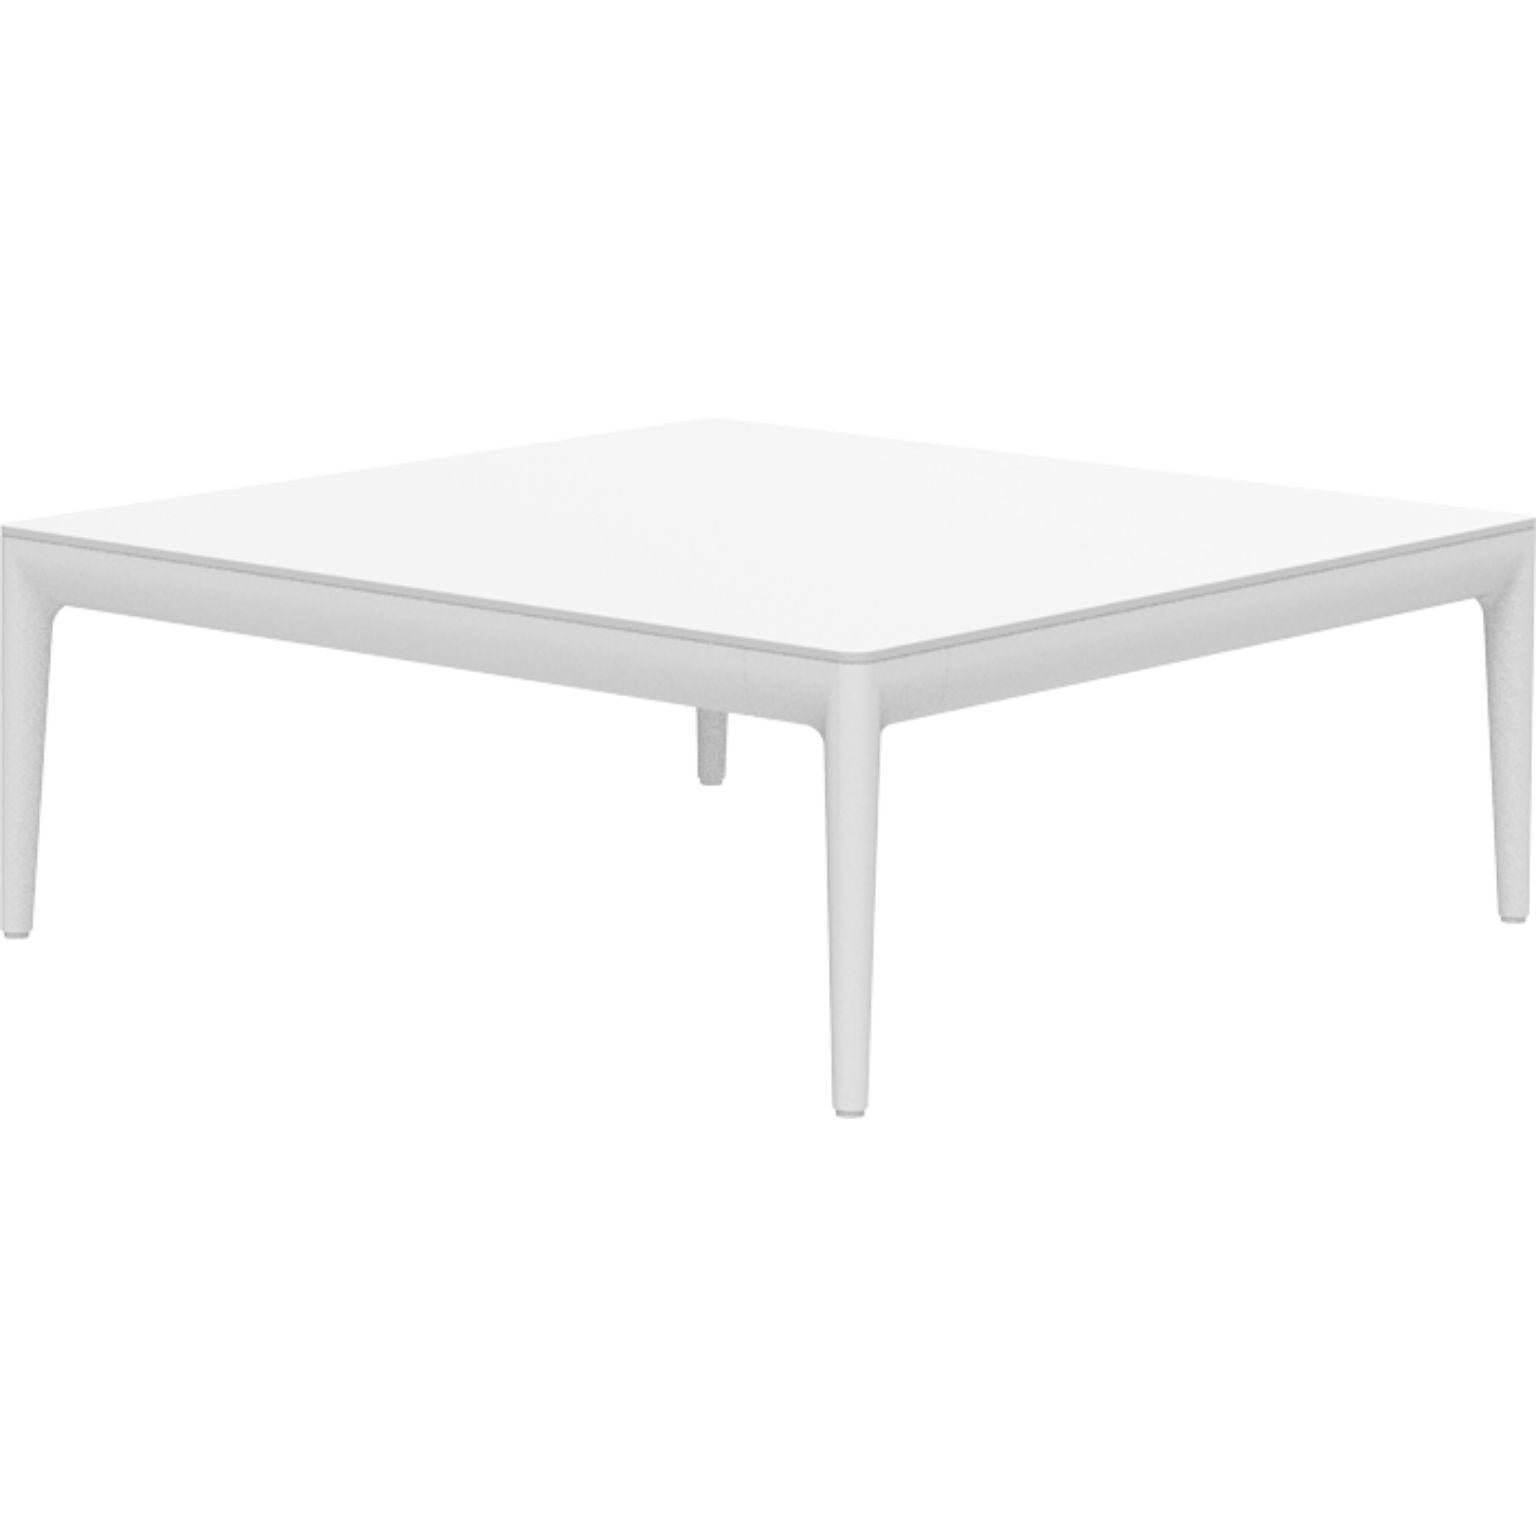 Ribbons white 76 coffee table by MOWEE
Dimensions: D 76 x W 76 x H 29 cm
Material: Aluminum and HPL top.
Weight: 12 kg.
Also available in different colors and finishes. (HPL Black Edge or Neolith top).

An unmistakable collection for its